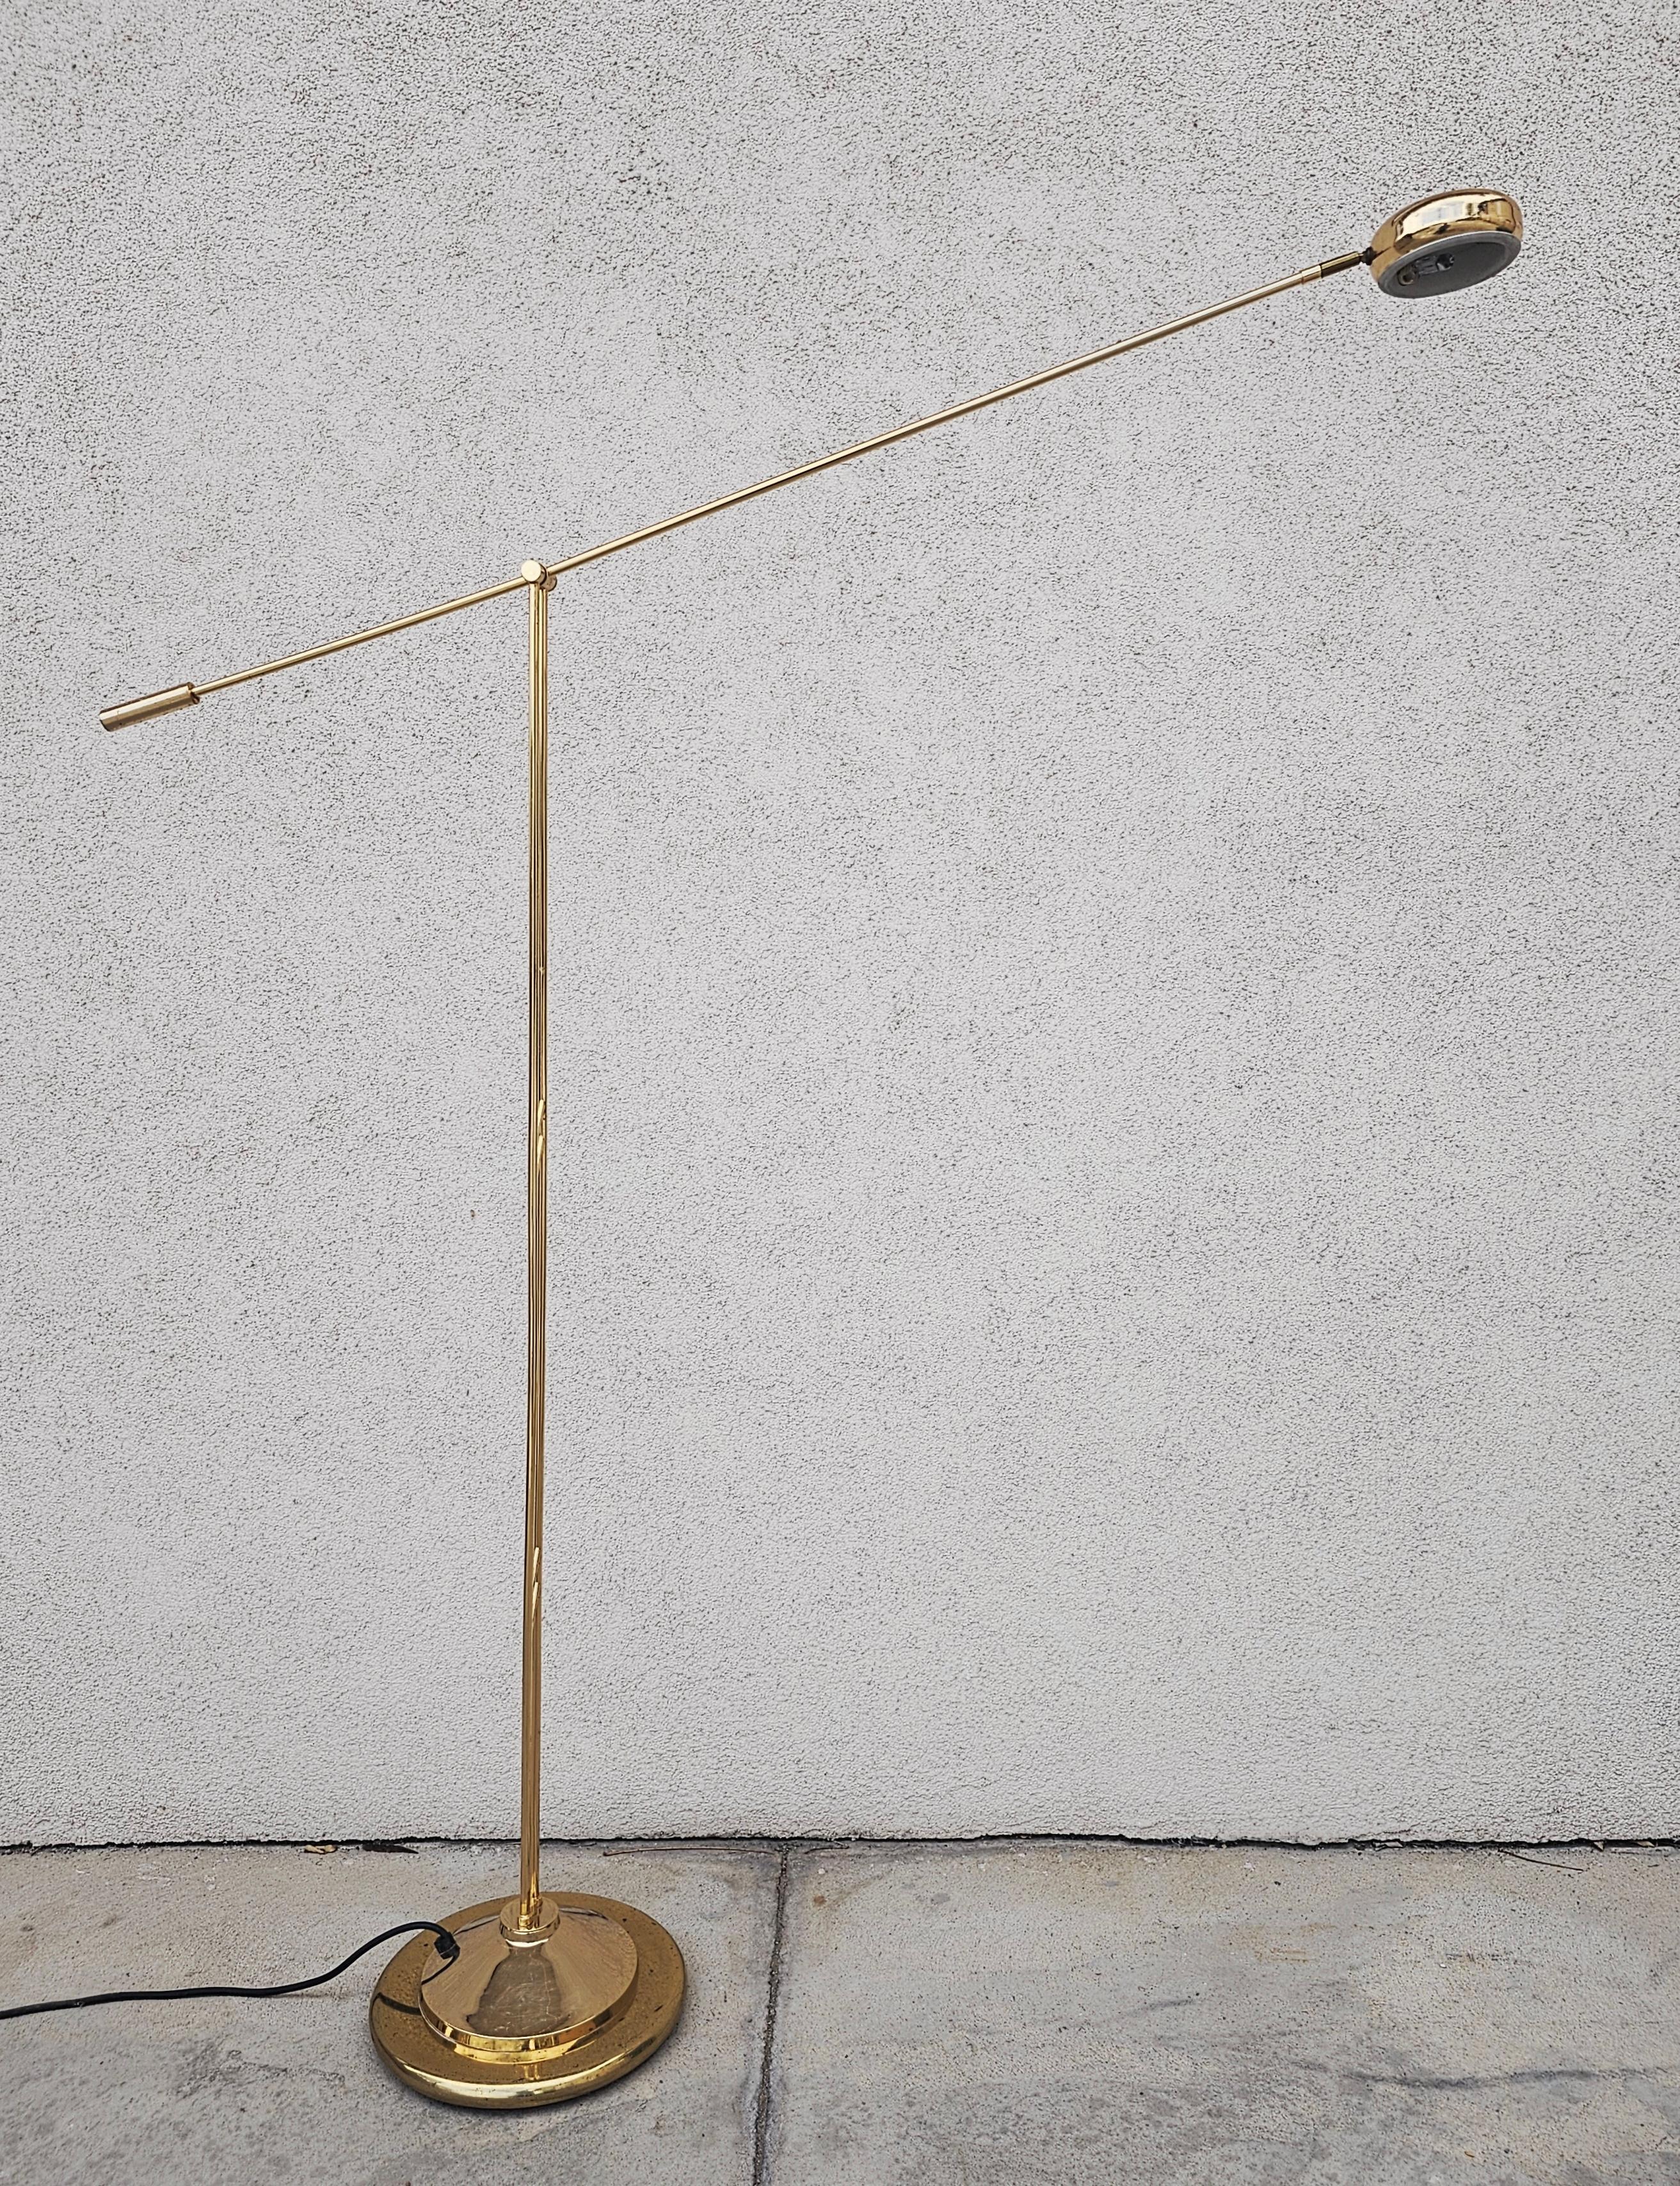 In this listing you will find an elegant and tall Mid Century Modern Floor Lamp. It's completely done in brass and features very elegant lines, with an adjustable arm that allows you play with the height of the light. The head of the lump is also